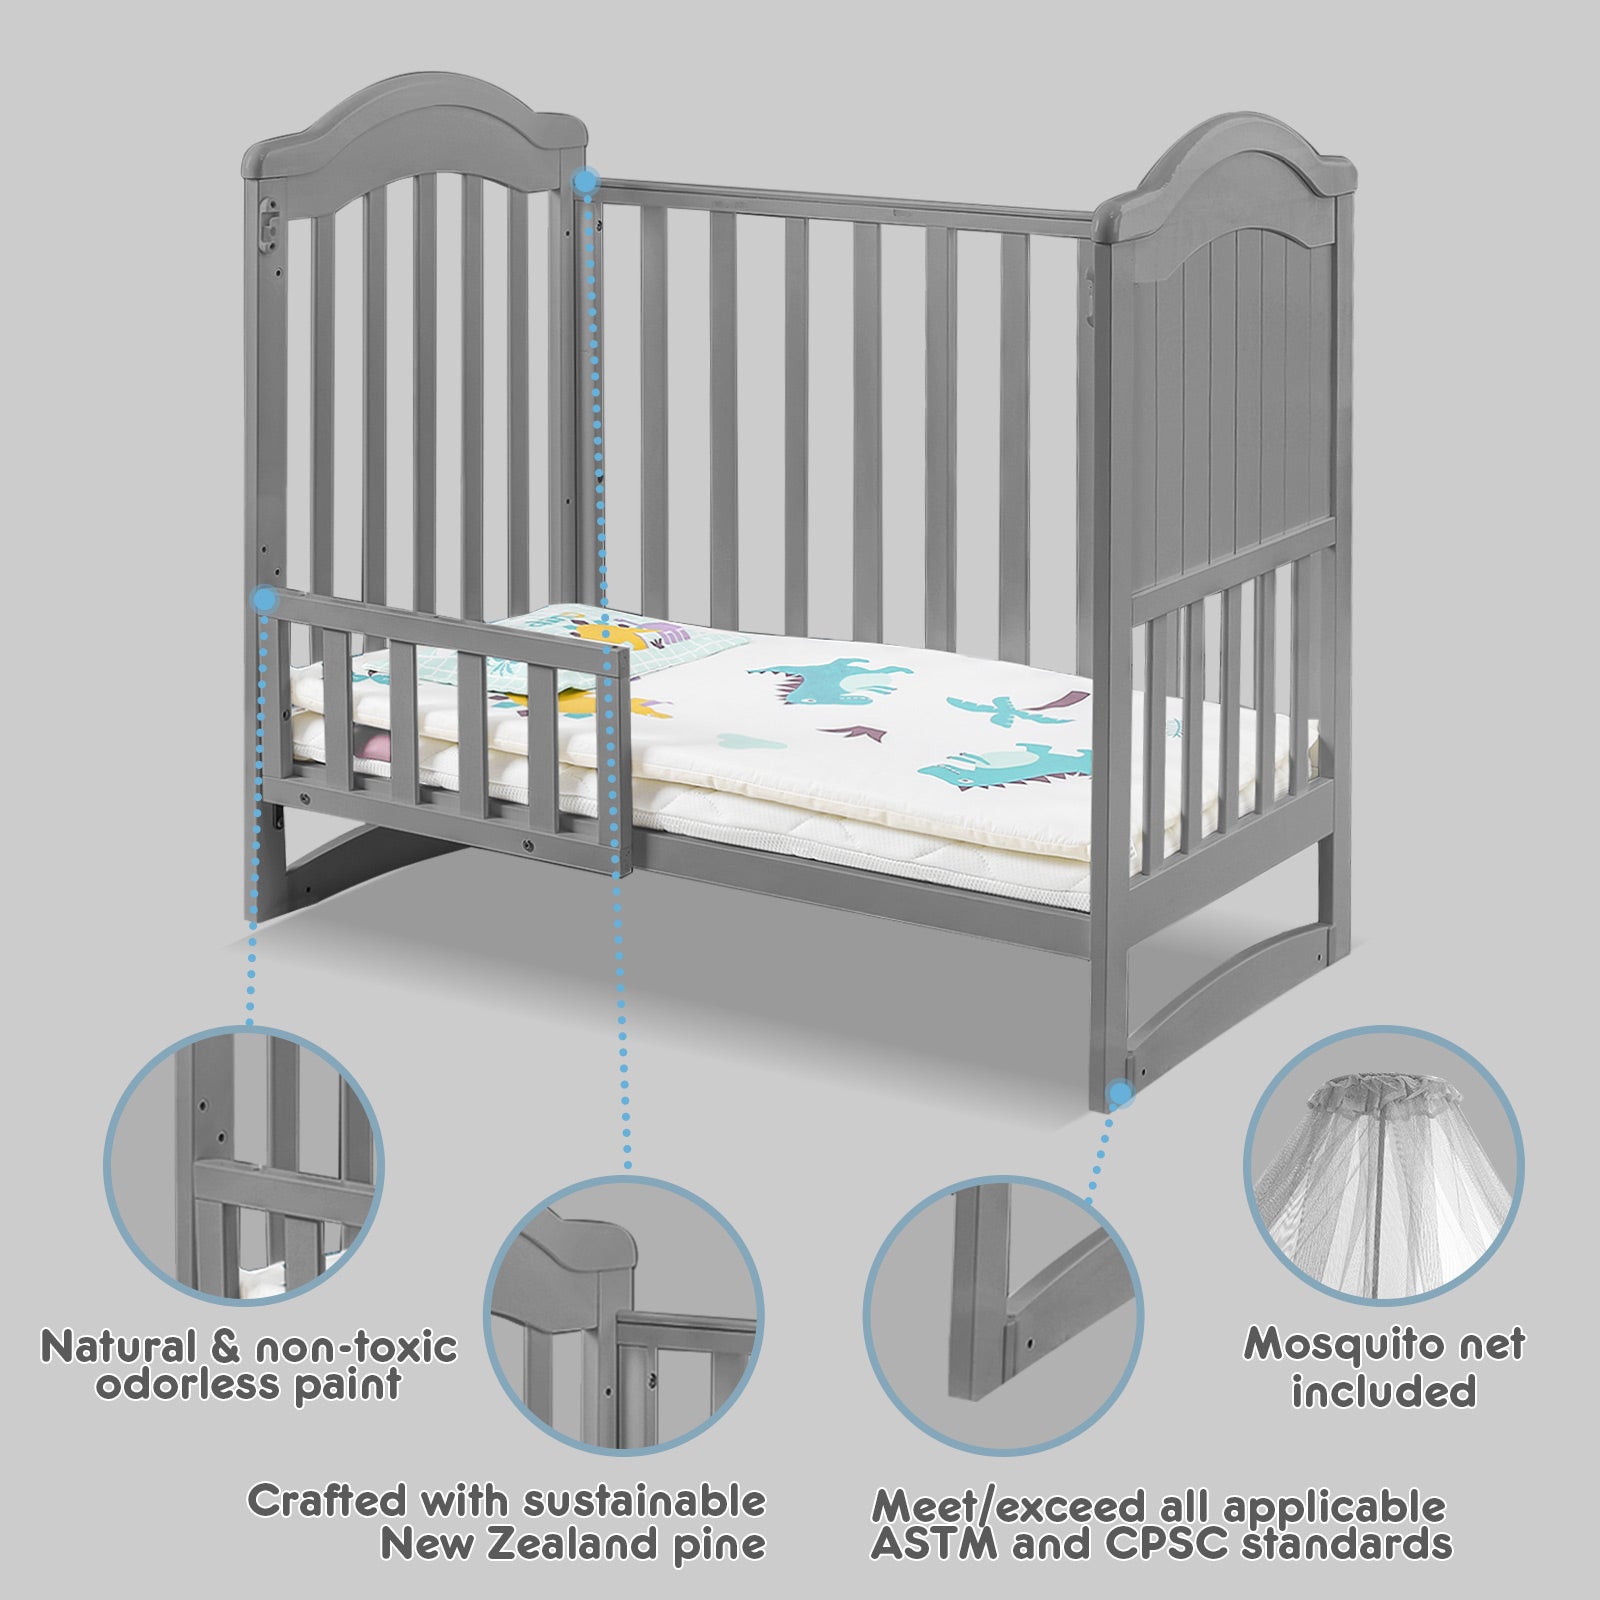 Portable Infant Bed with Mosquito Net - Certified, Chemical-Free Baby Bed